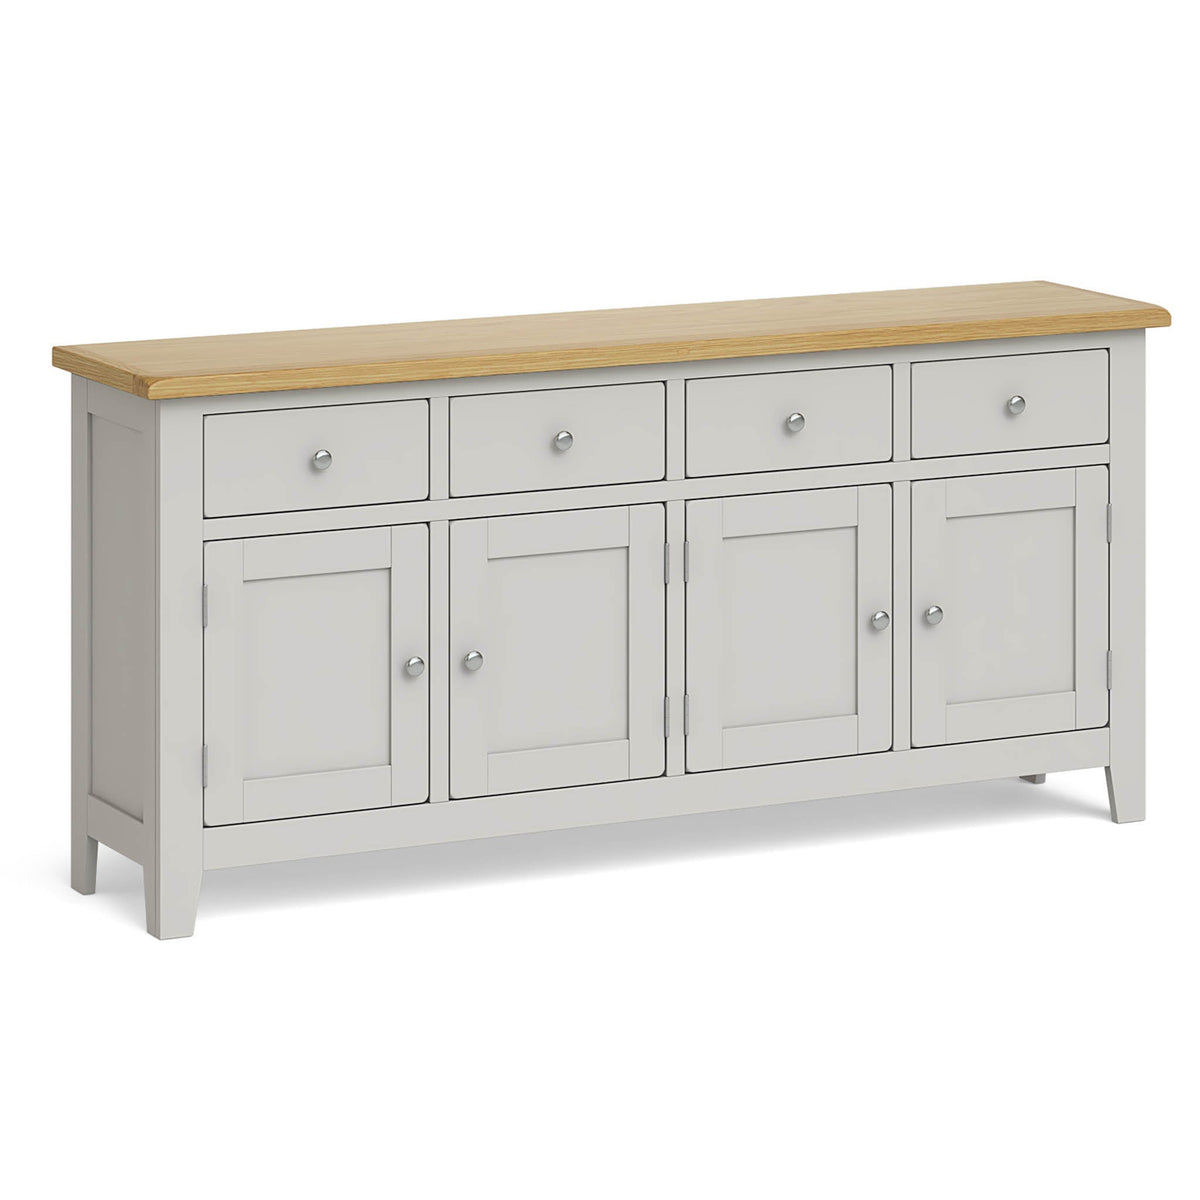 Lundy Grey Extra Large Sideboard Unit by Roseland Furniture